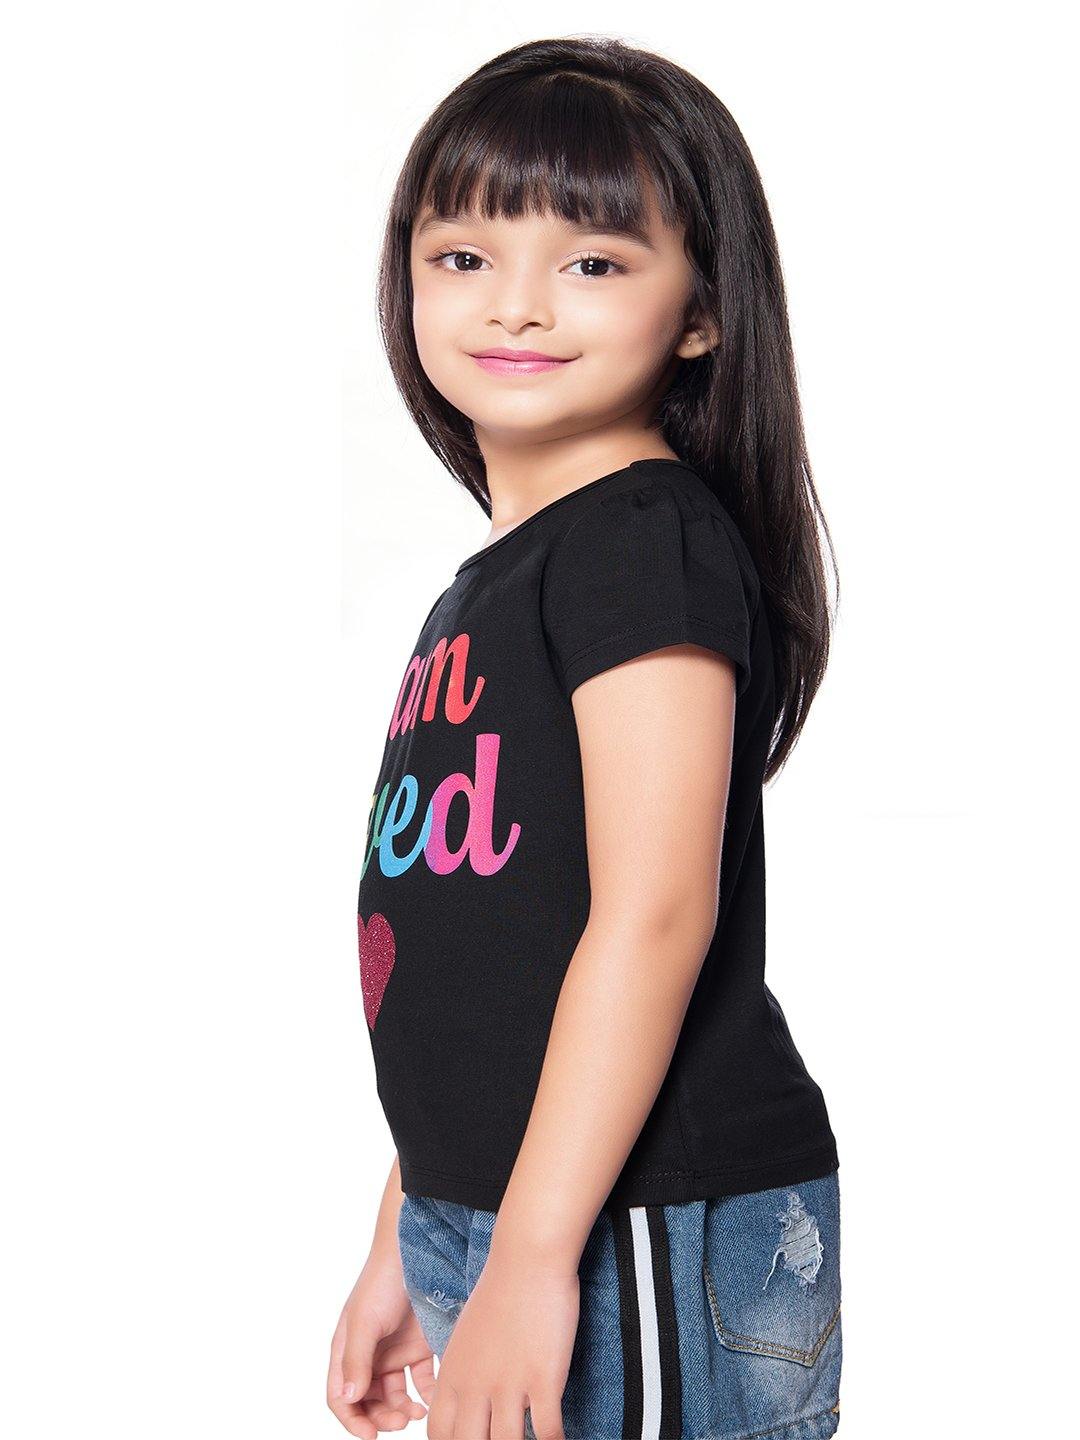 Tiny Baby Black Colored Top - T-112 Black - TINY BABY INDIA shop.tinybaby.in